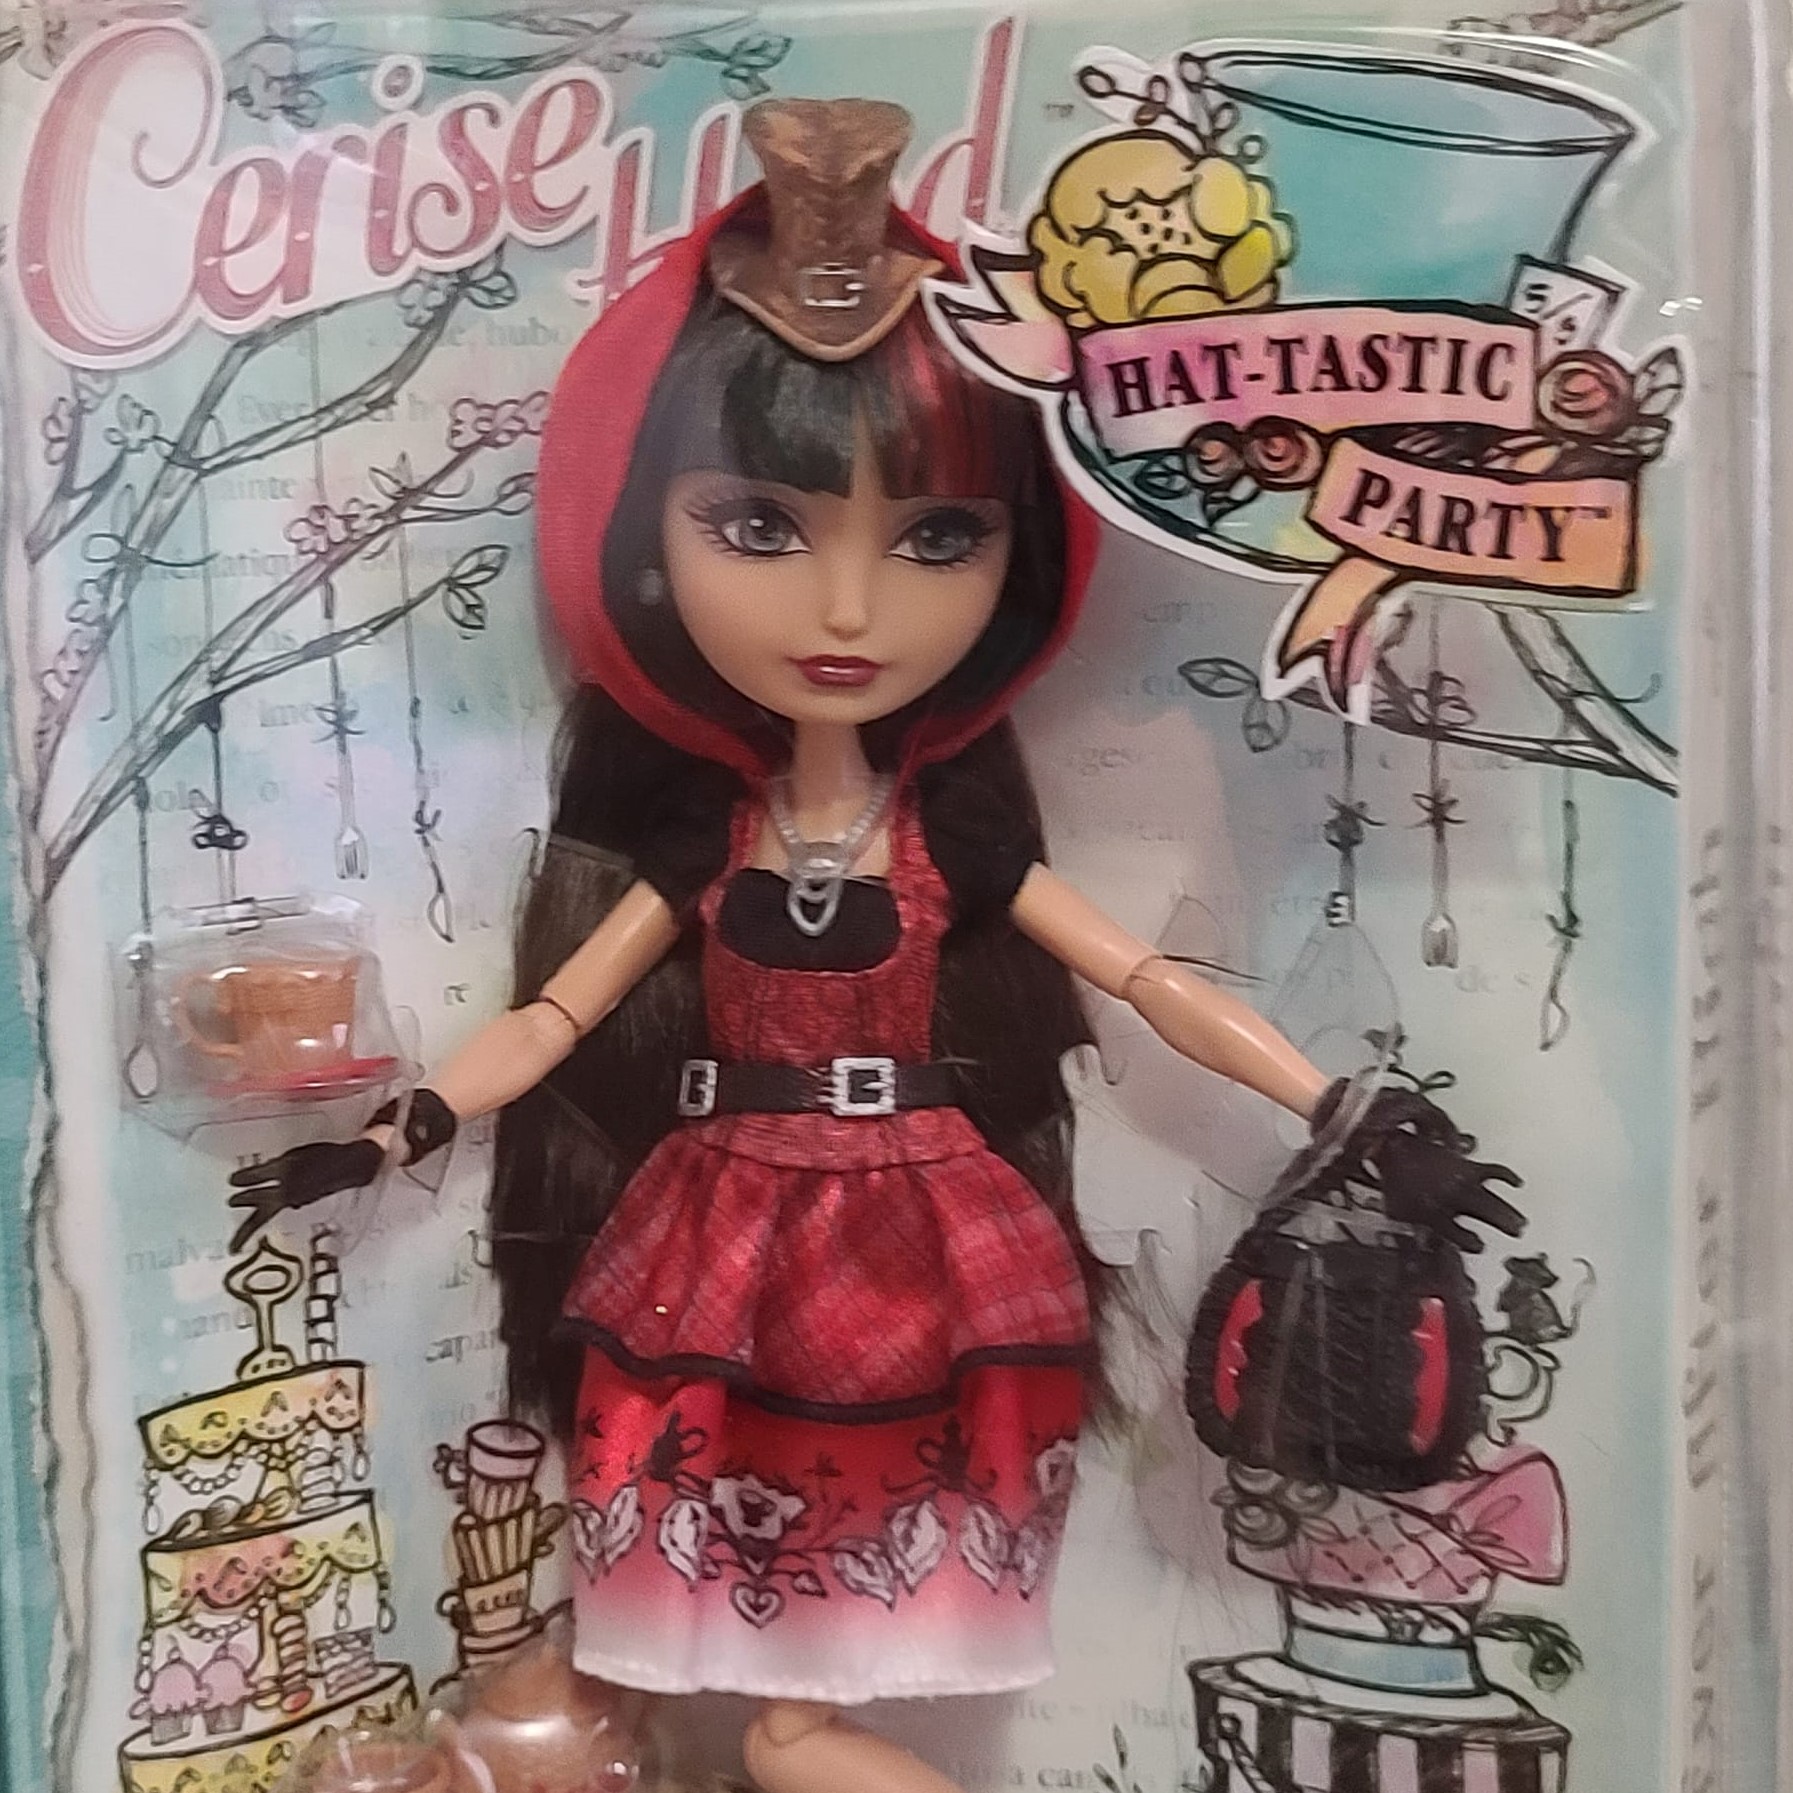 Mattel Ever After High Cerise doll, Retired New in box 2013